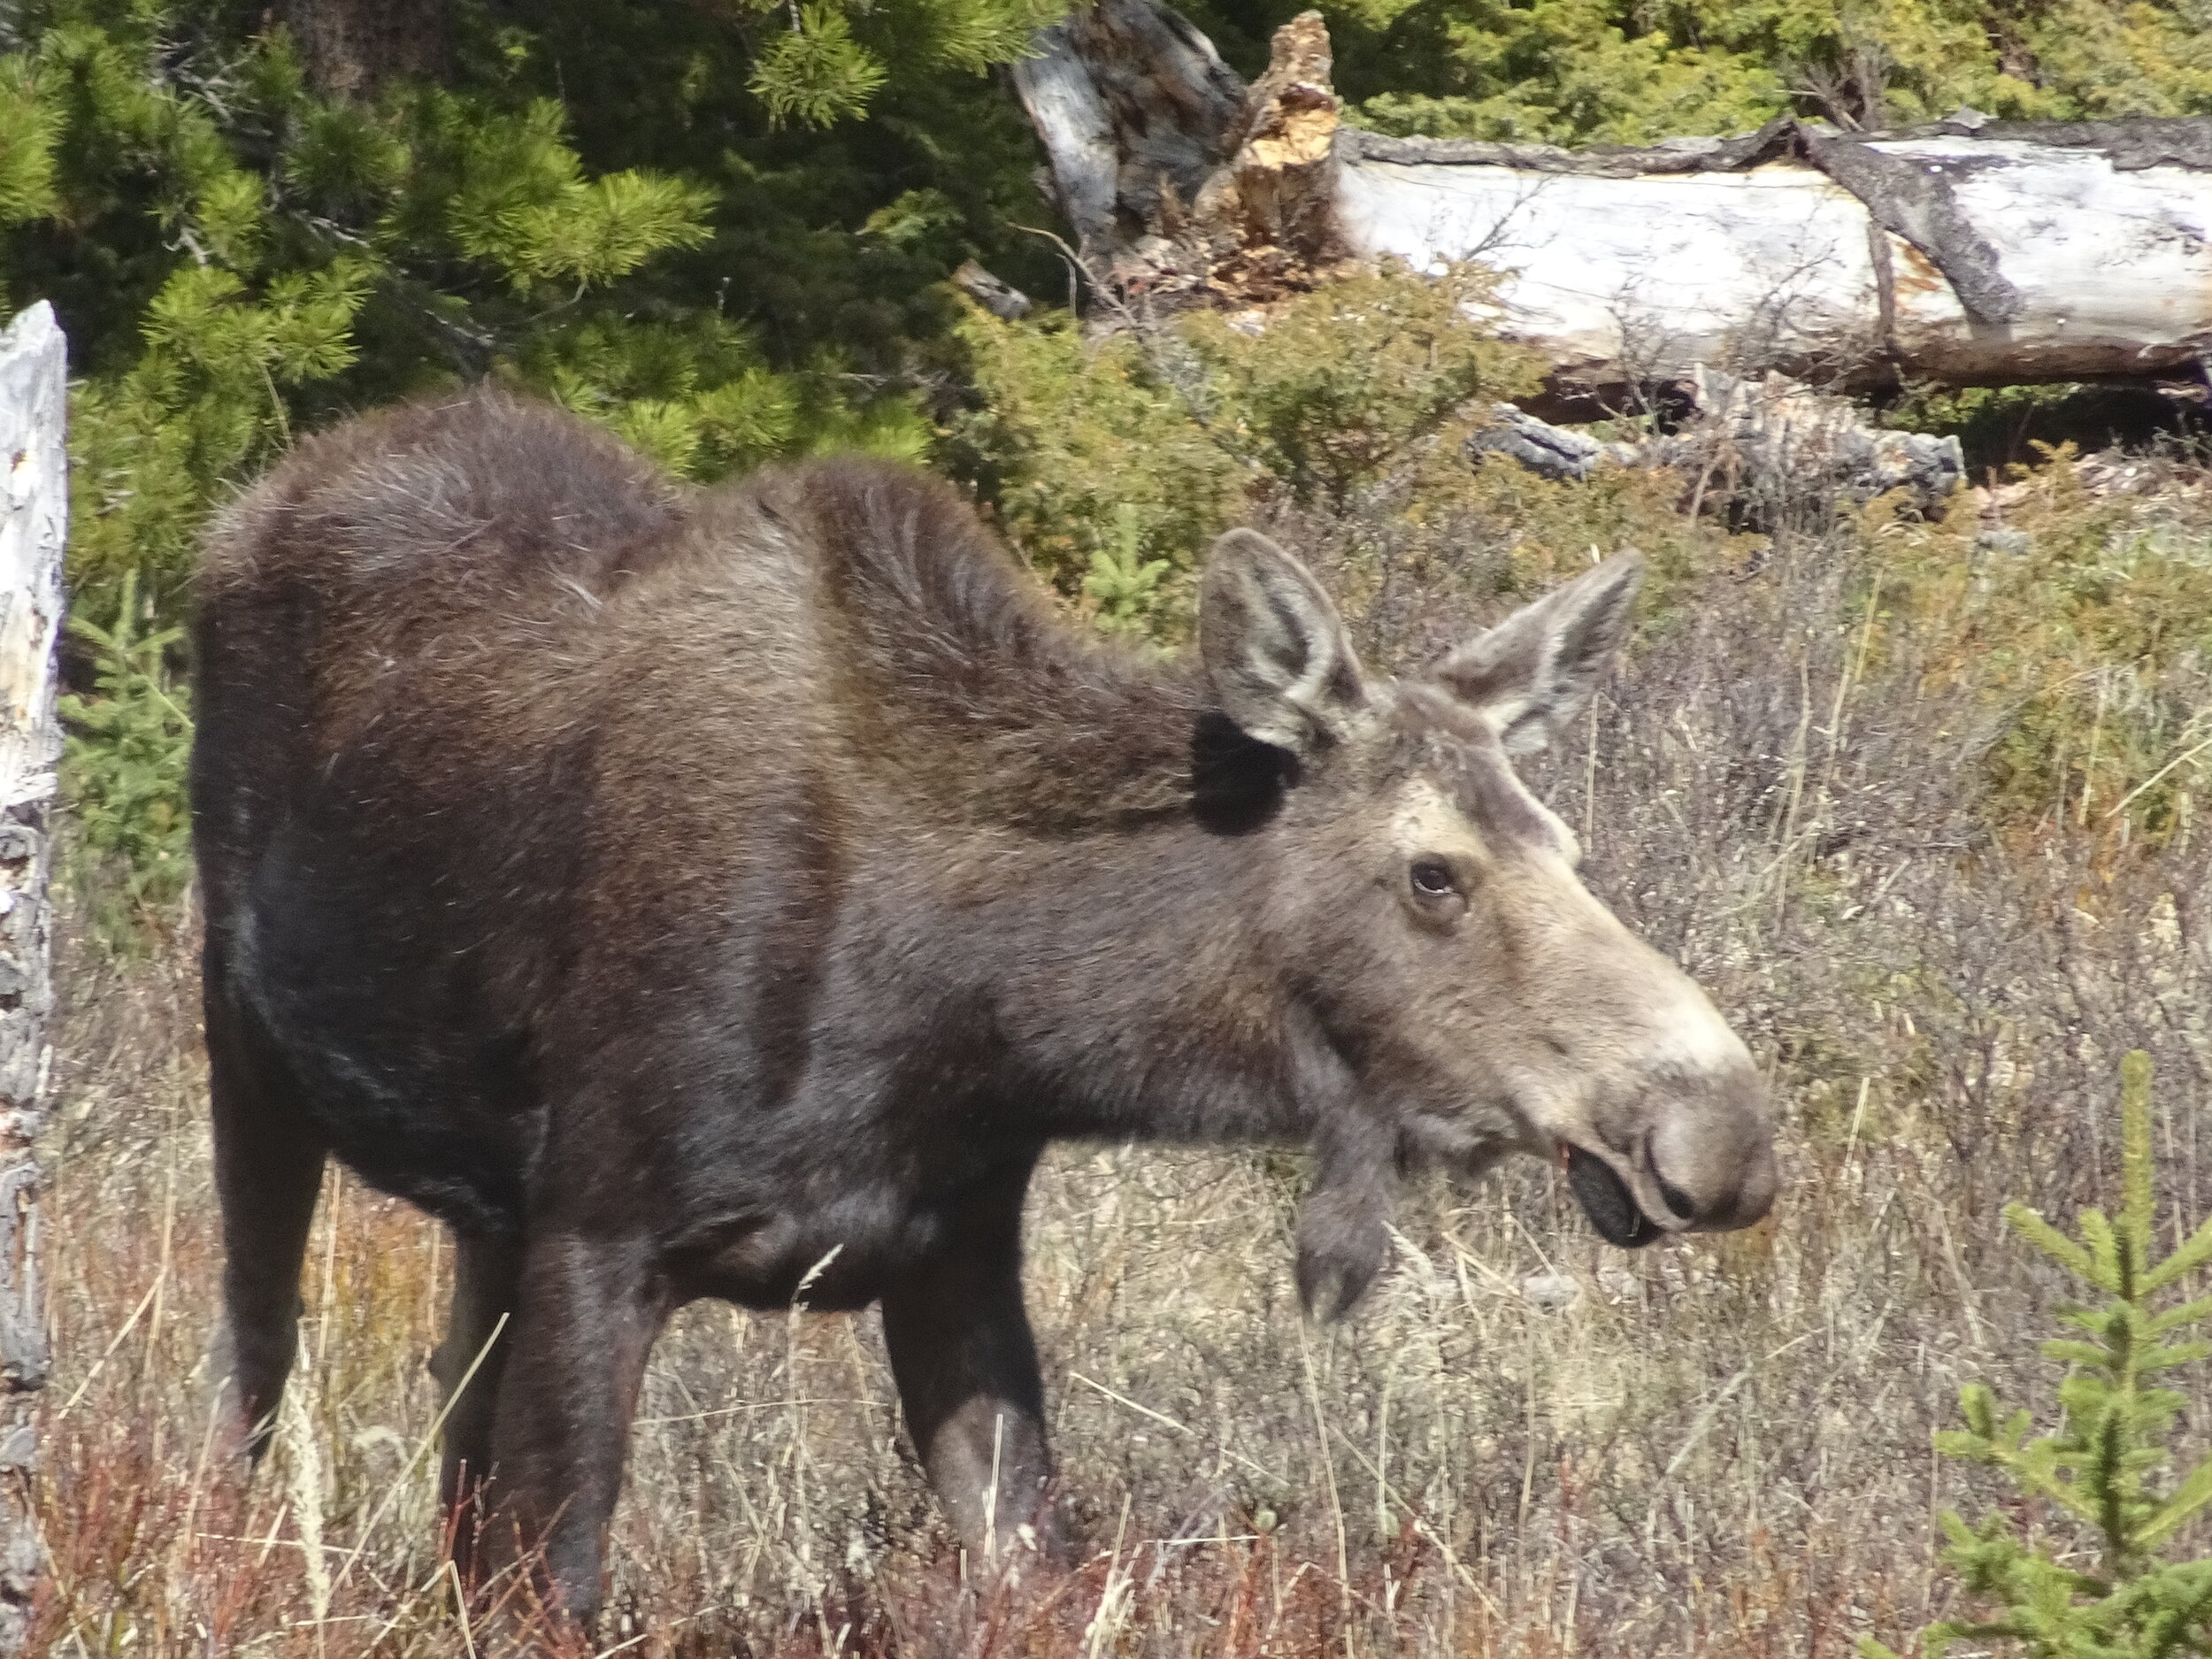 A better view of our moose in Bighorn National Forest, near Buffalo, WY.  Photo by Karen Boudreaux, May 28, 2021